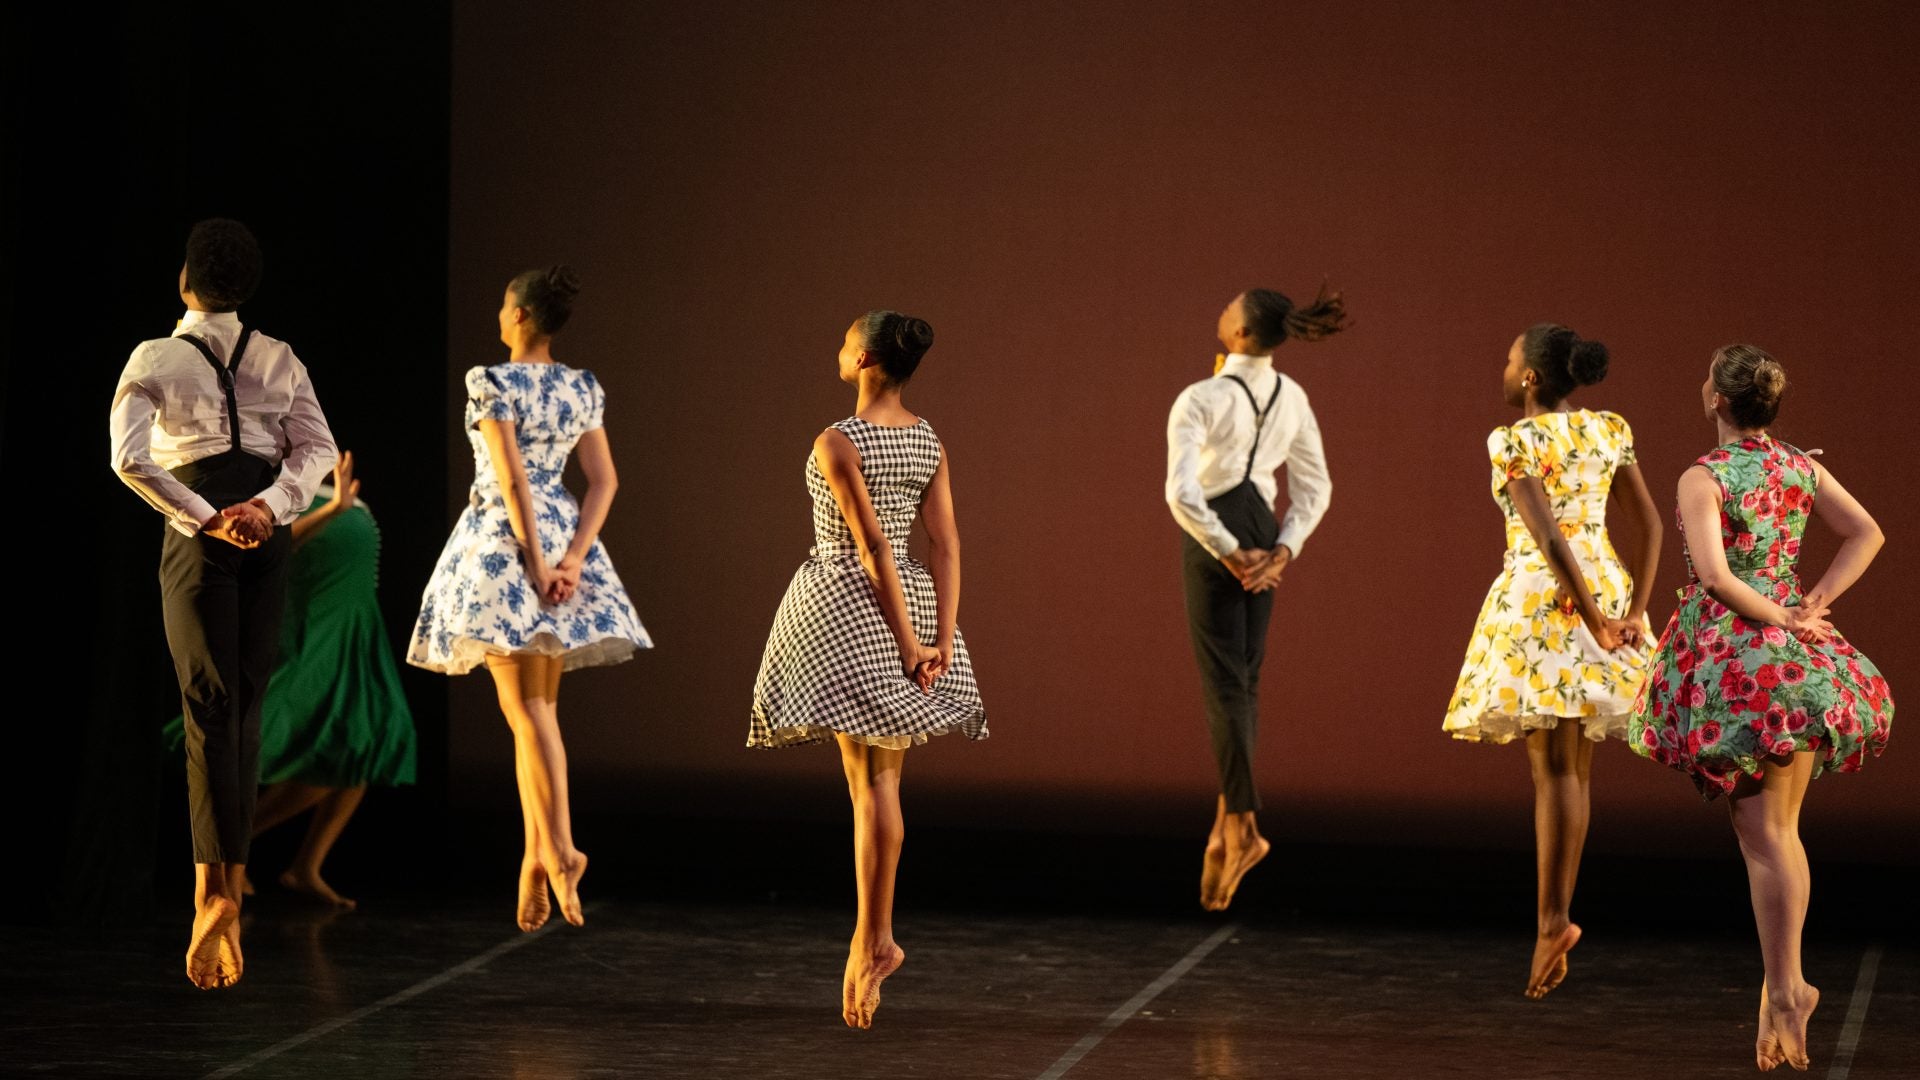 Did You Know There's A Festival Dedicated Entirely To Black Dance? Here's What You Missed